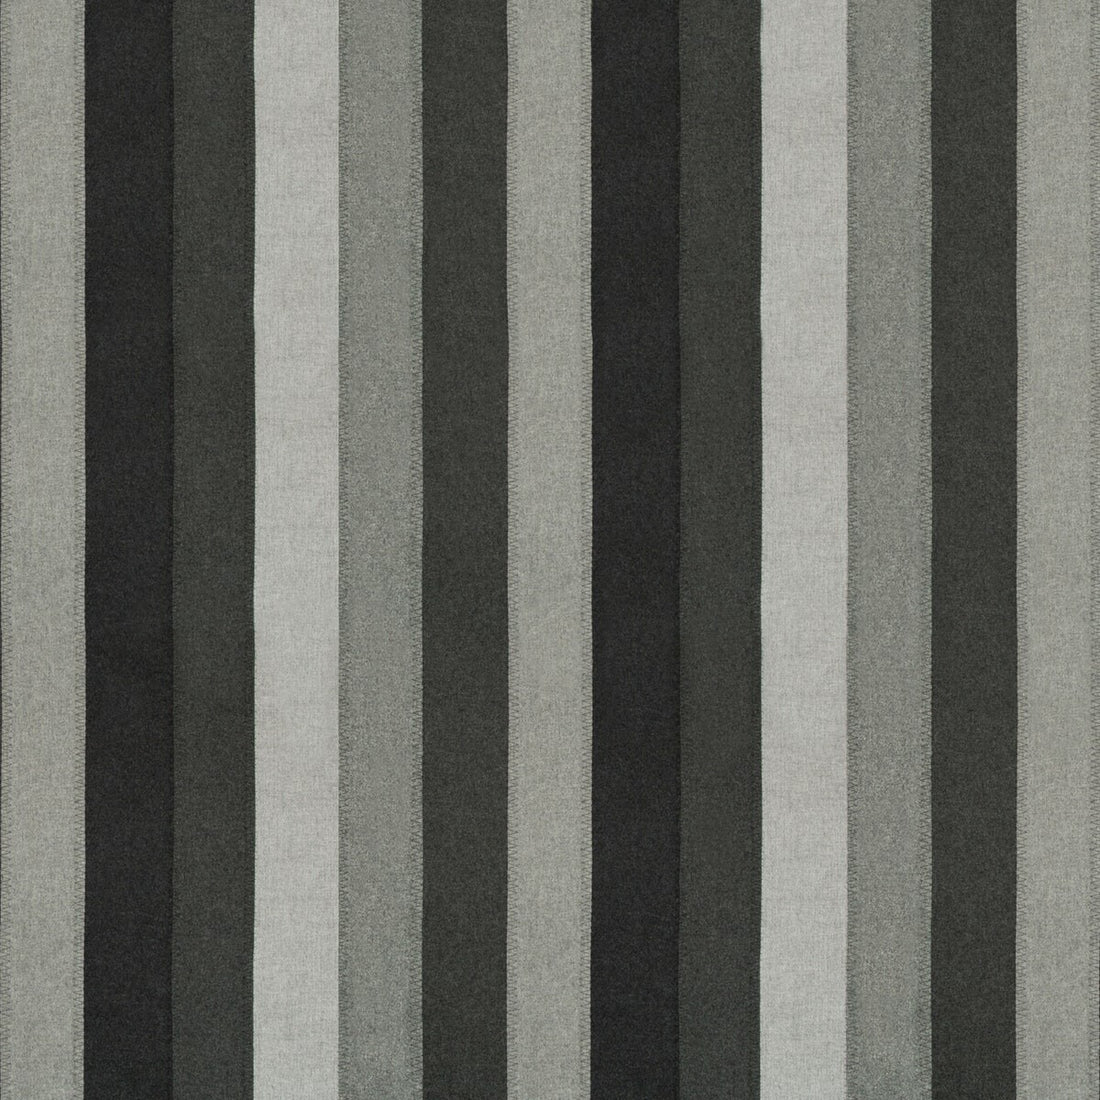 New Suit fabric in charcoal color - pattern 34913.811.0 - by Kravet Couture in the Modern Tailor collection